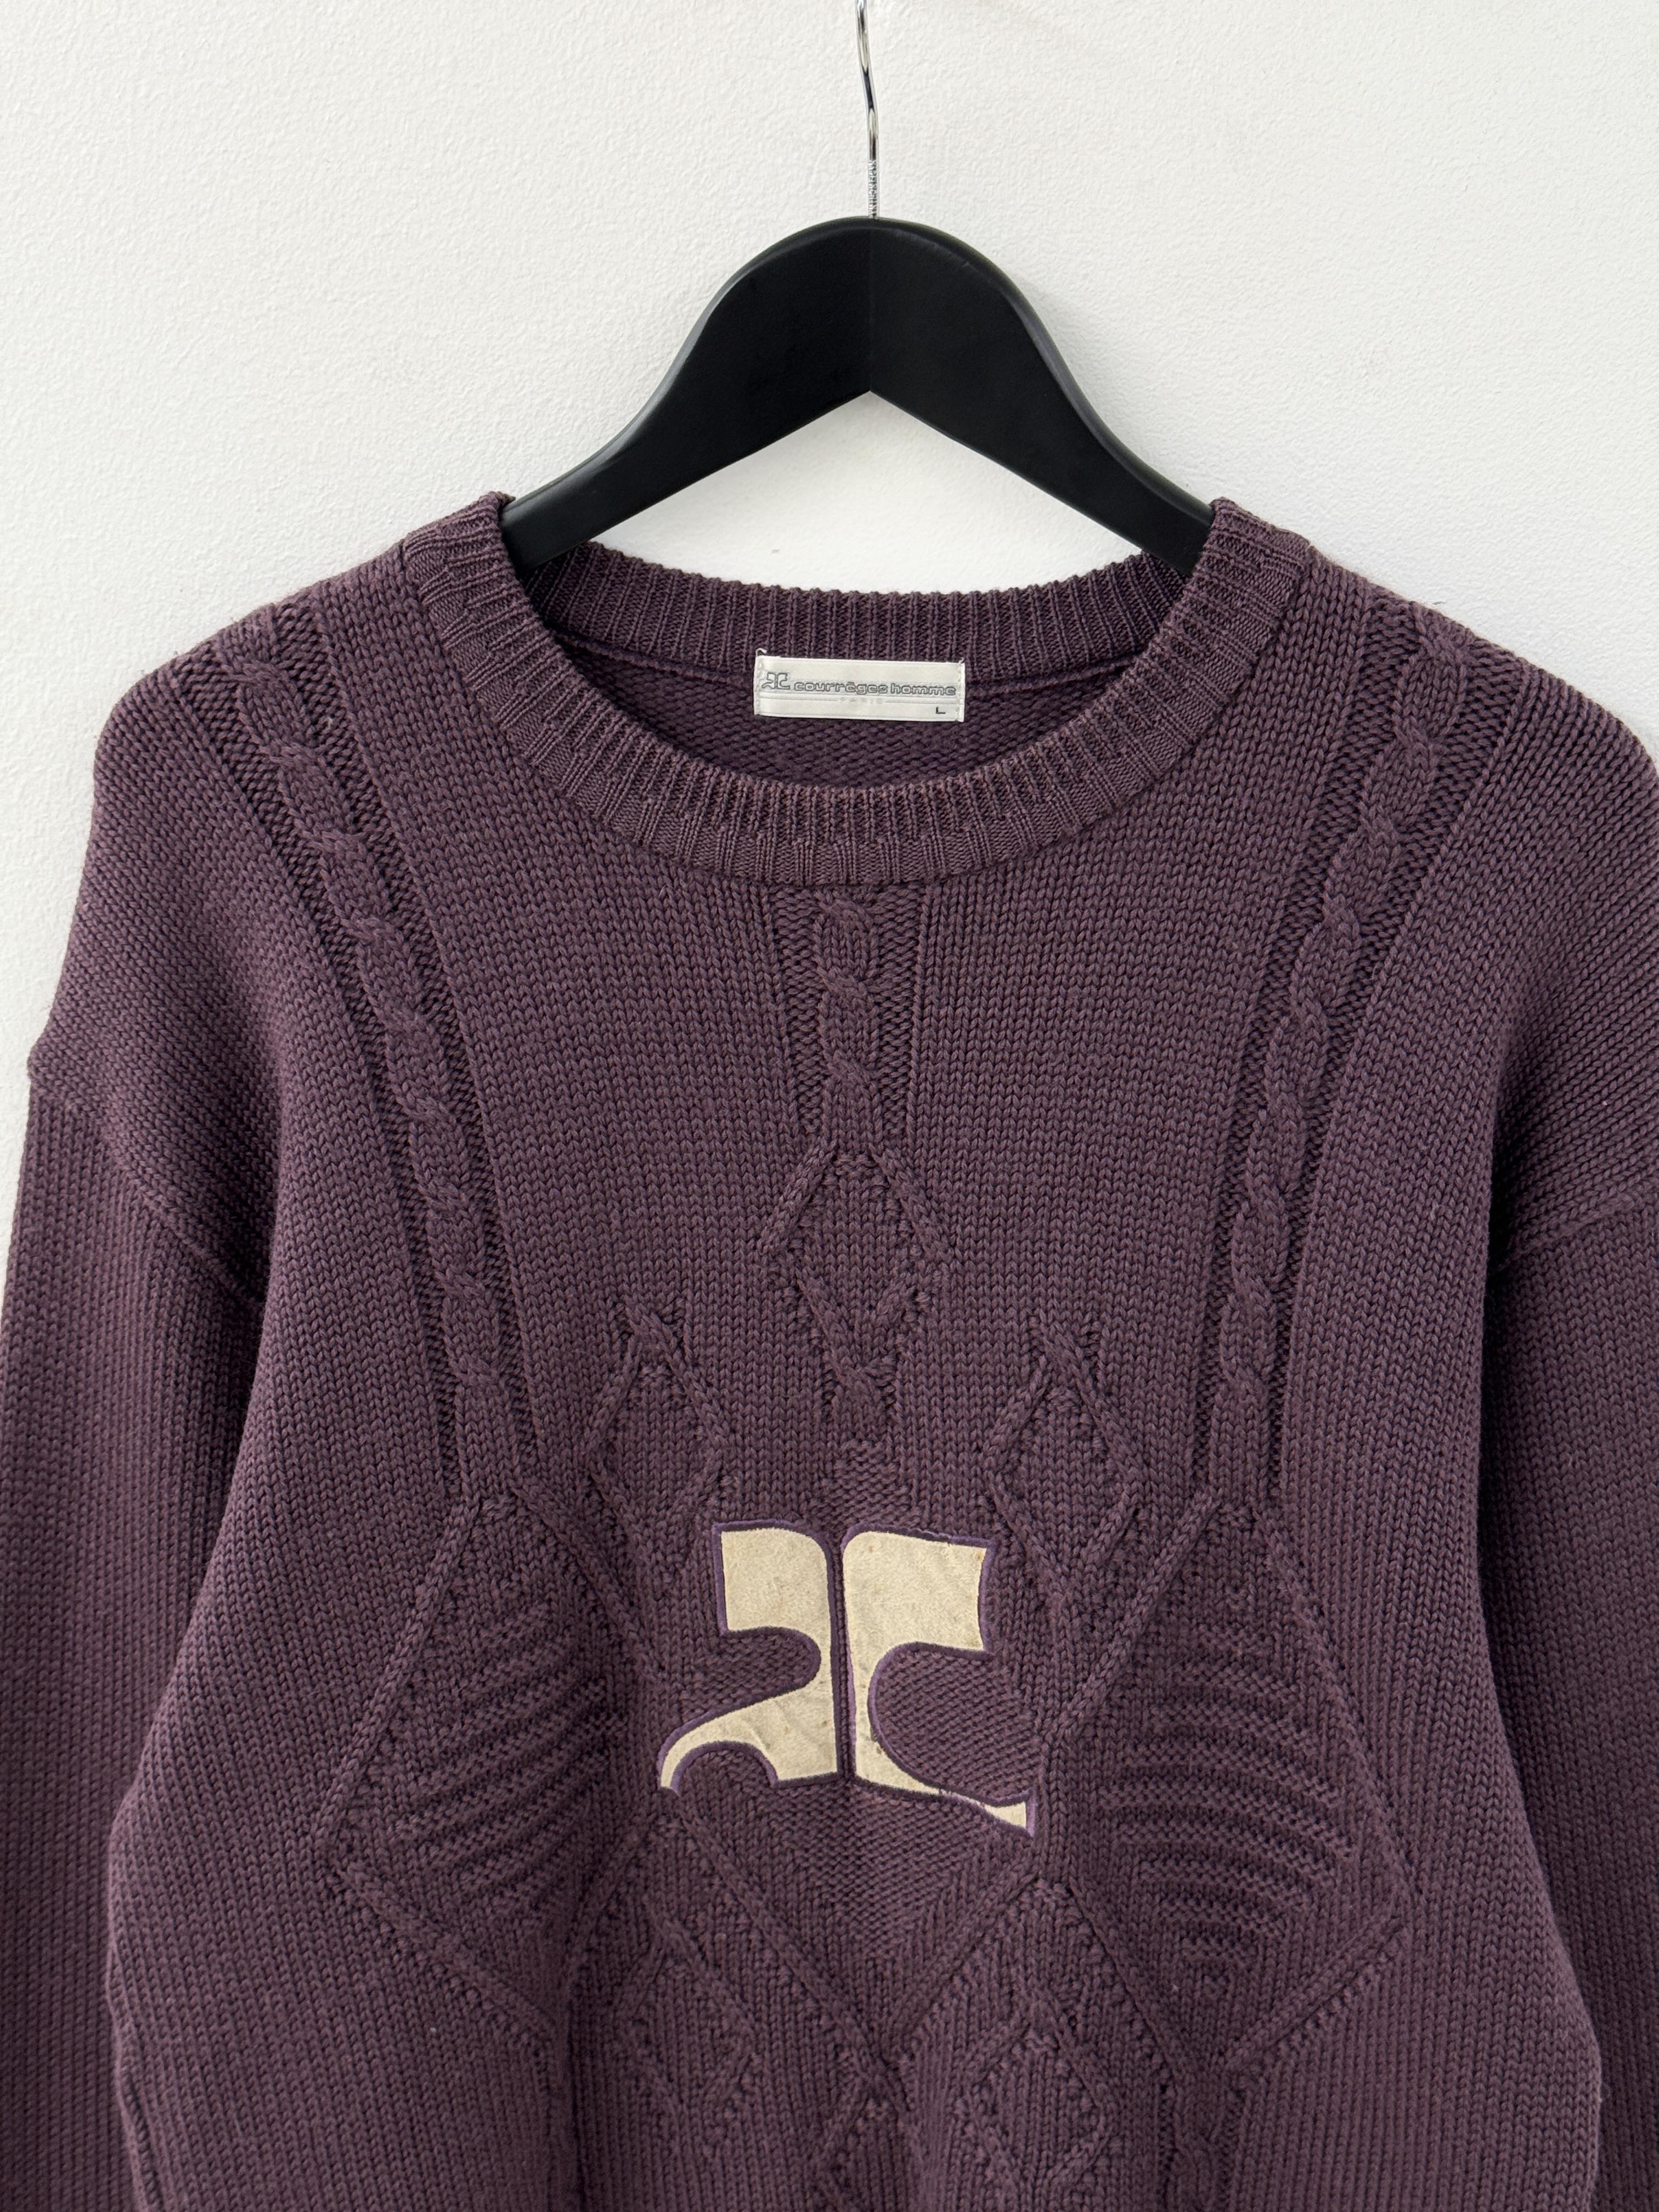 courreges homme sweater